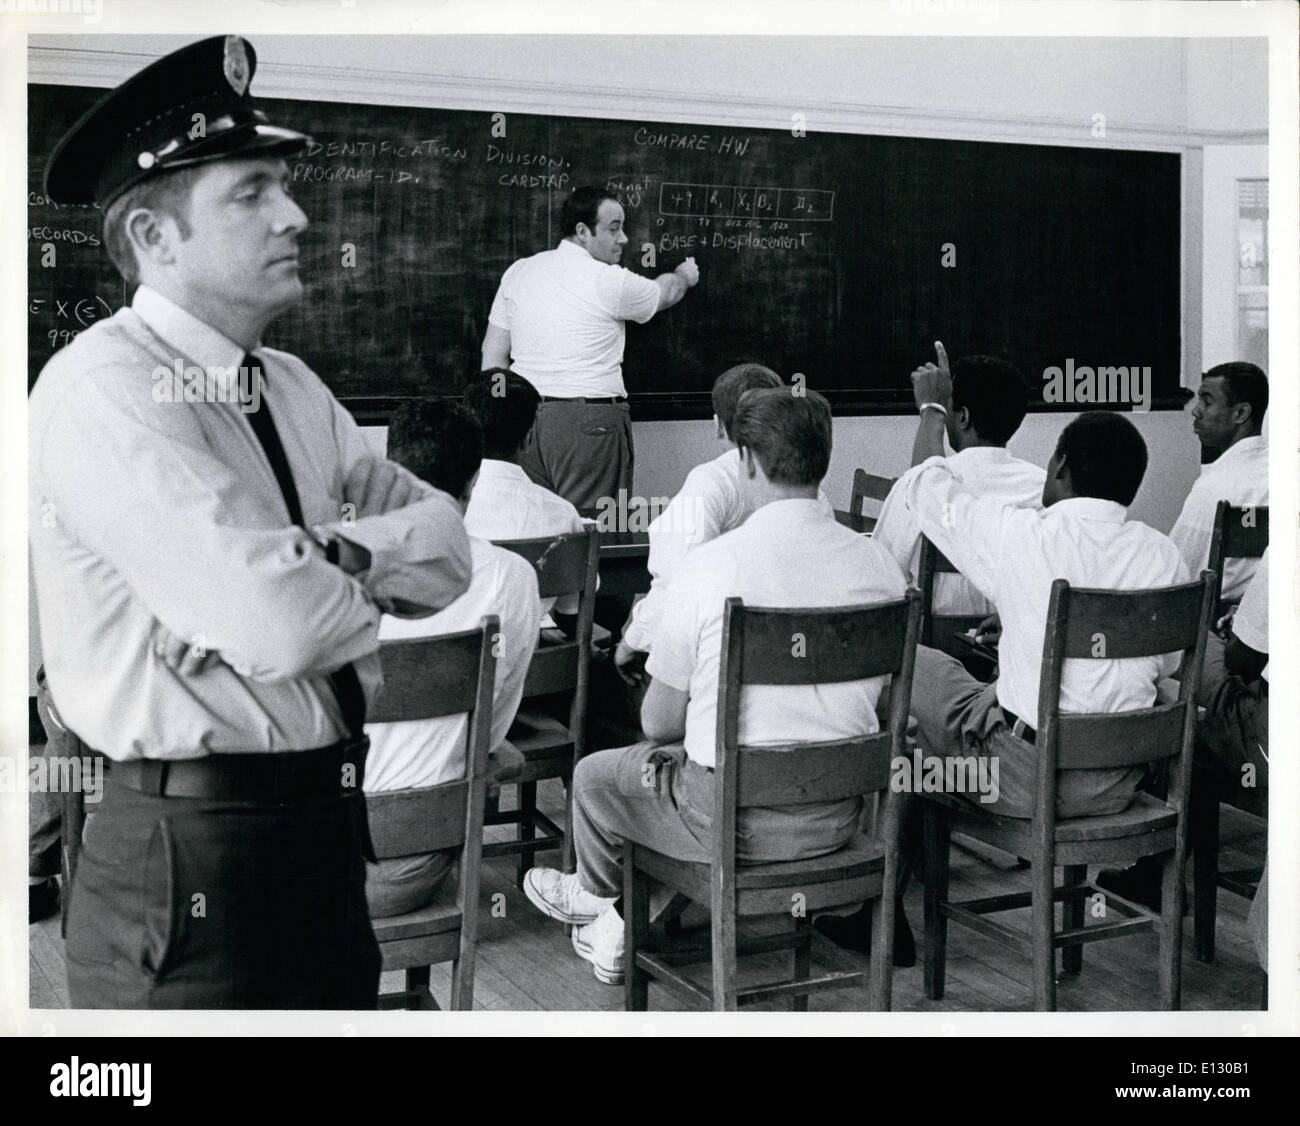 Feb. 26, 2012 - Sing Sing convicts trained in Computer skills: Correction Officer Joseph D. Cassidy, Left, stands guard as convict Bernie W., at blackboard reviews computer problems with other students before graduation exercises this Friday, March 28, 1969. Bernie W. will be valedictorian at these exercises. Stock Photo